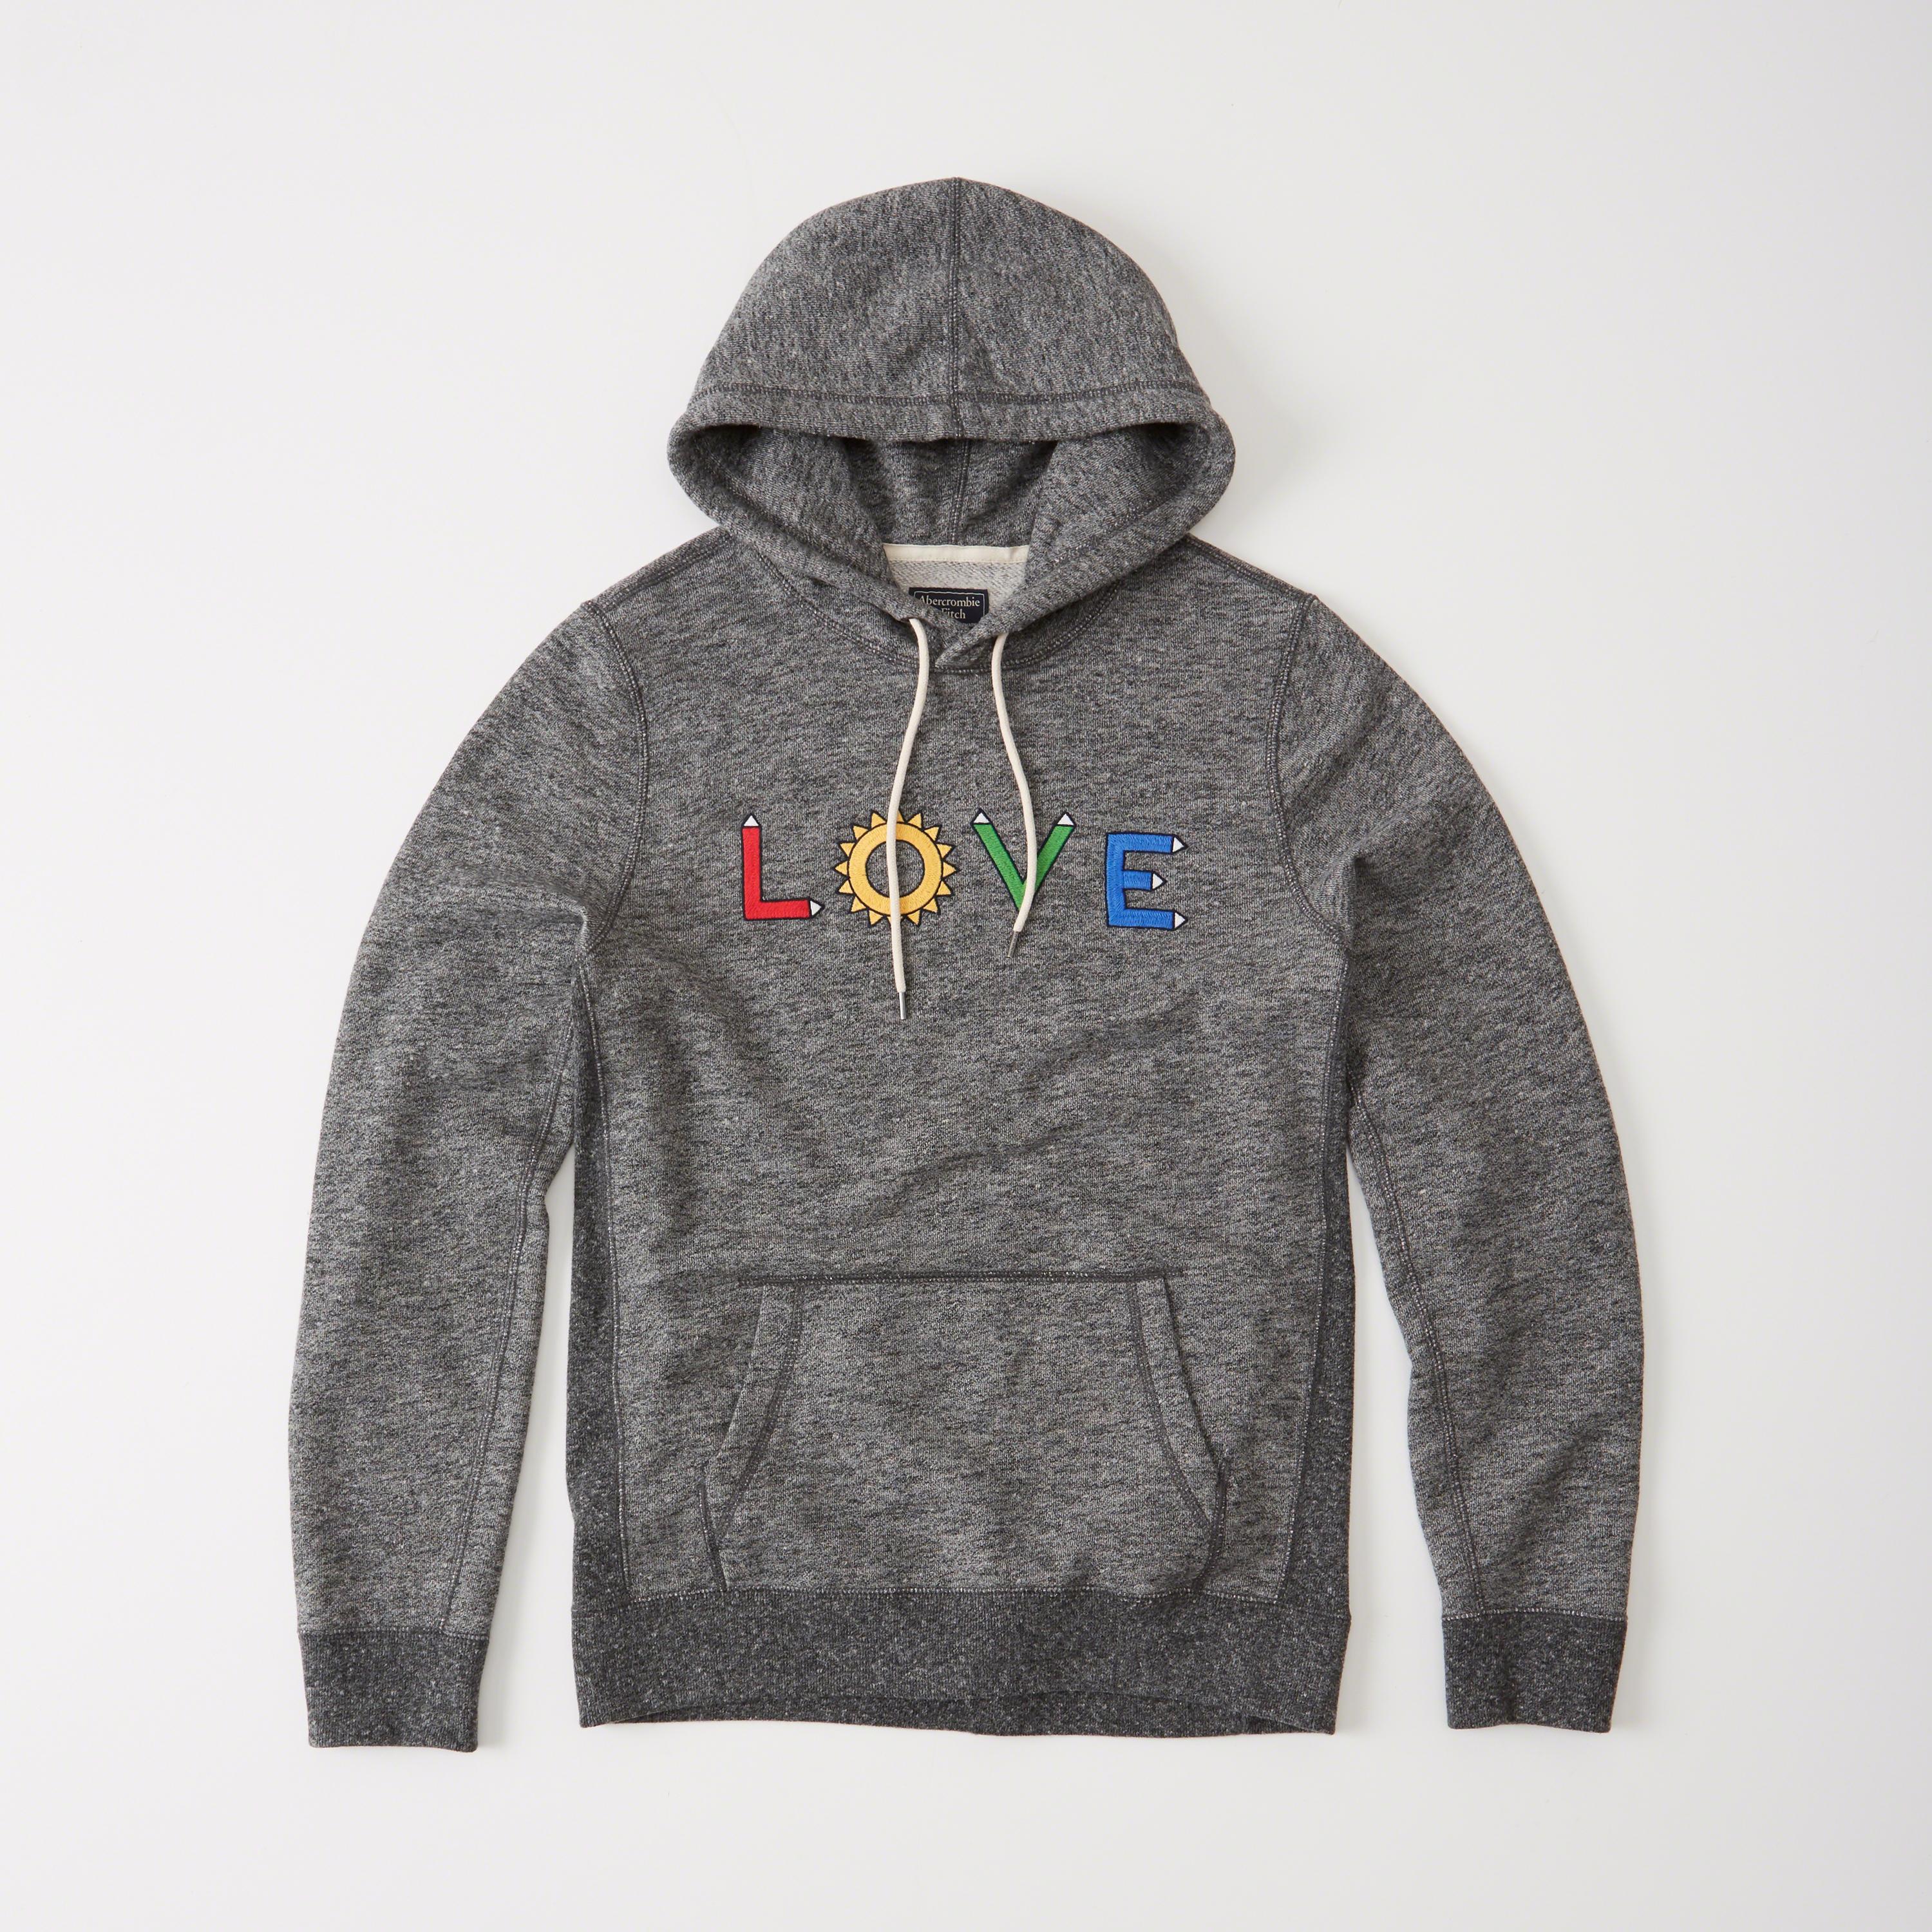 Lyst - Abercrombie & Fitch Pride Graphic Hoodie in Gray for Men